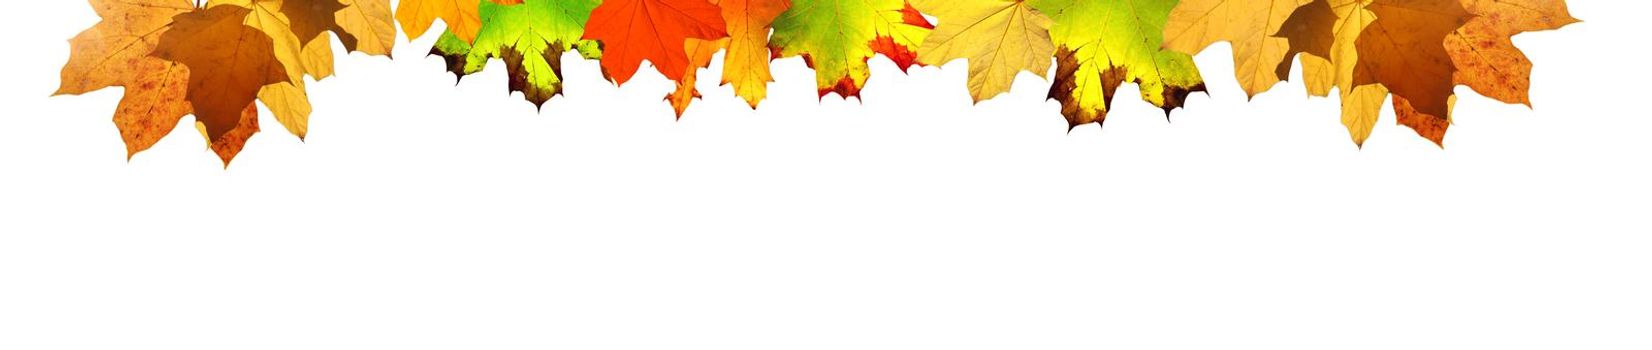 Colorful bright leaves isolated on white background in a frame